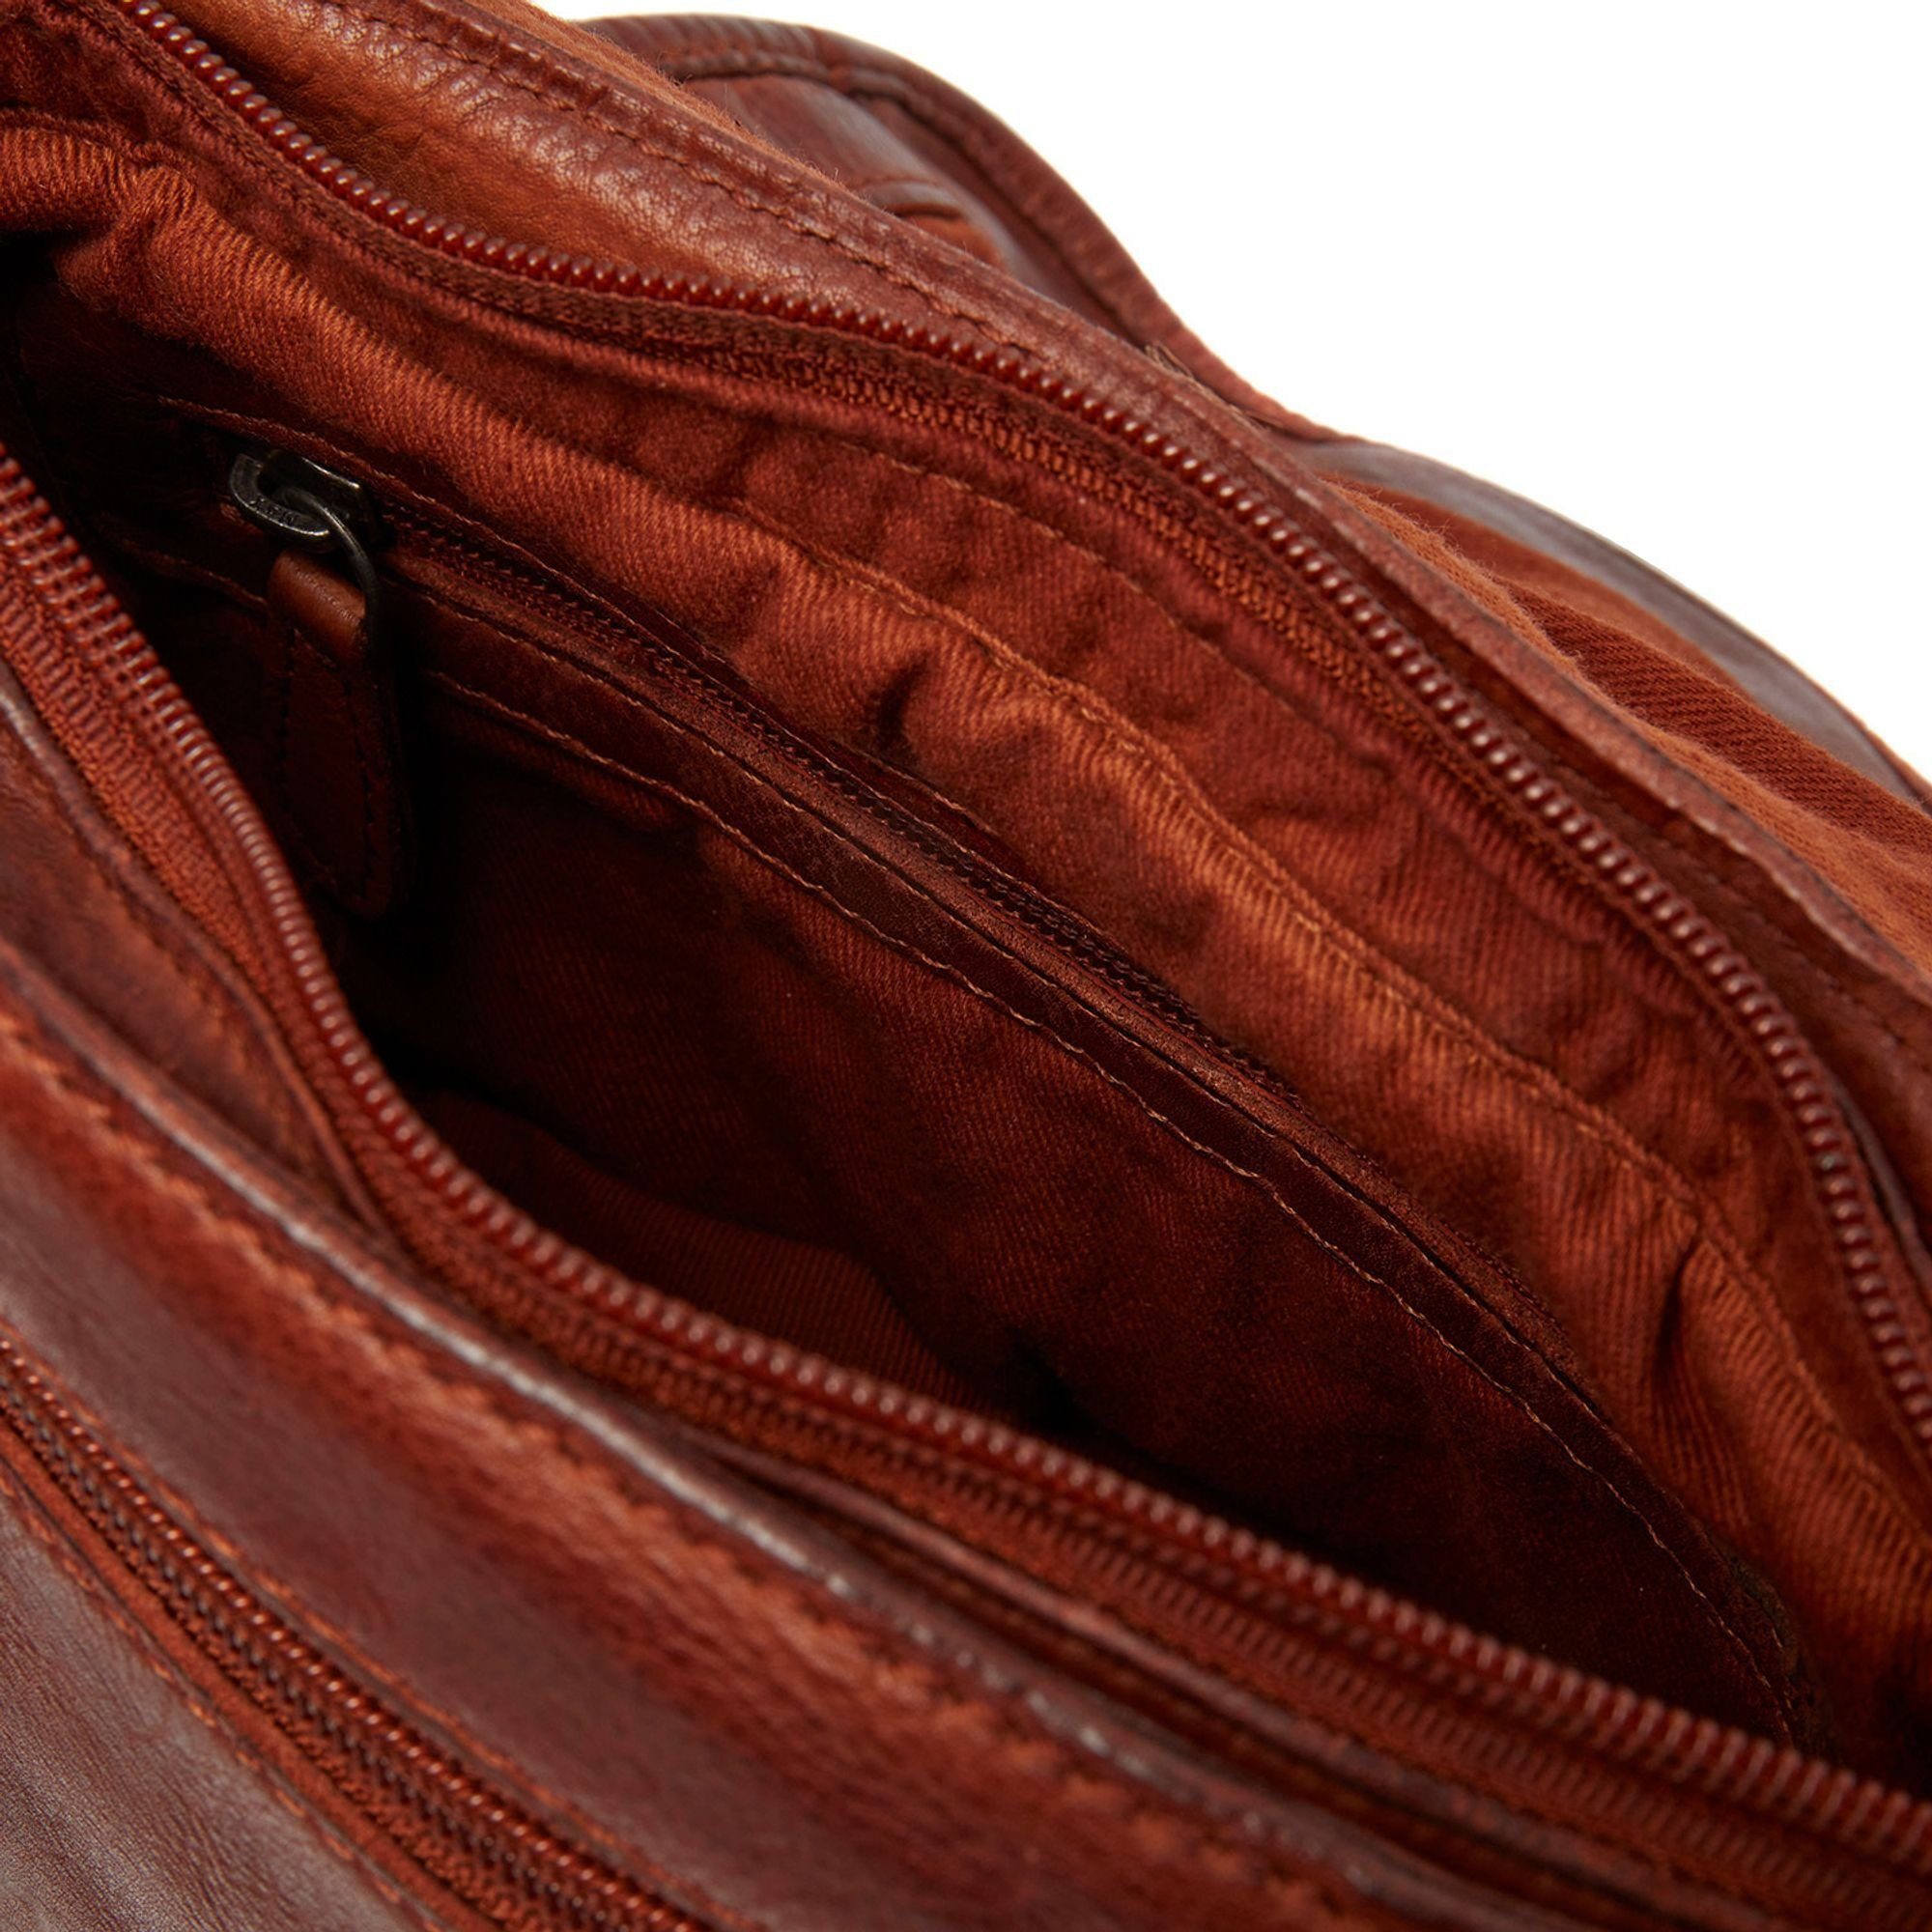 The Chesterfield Brand Schultertasche Washed, cognac Leder